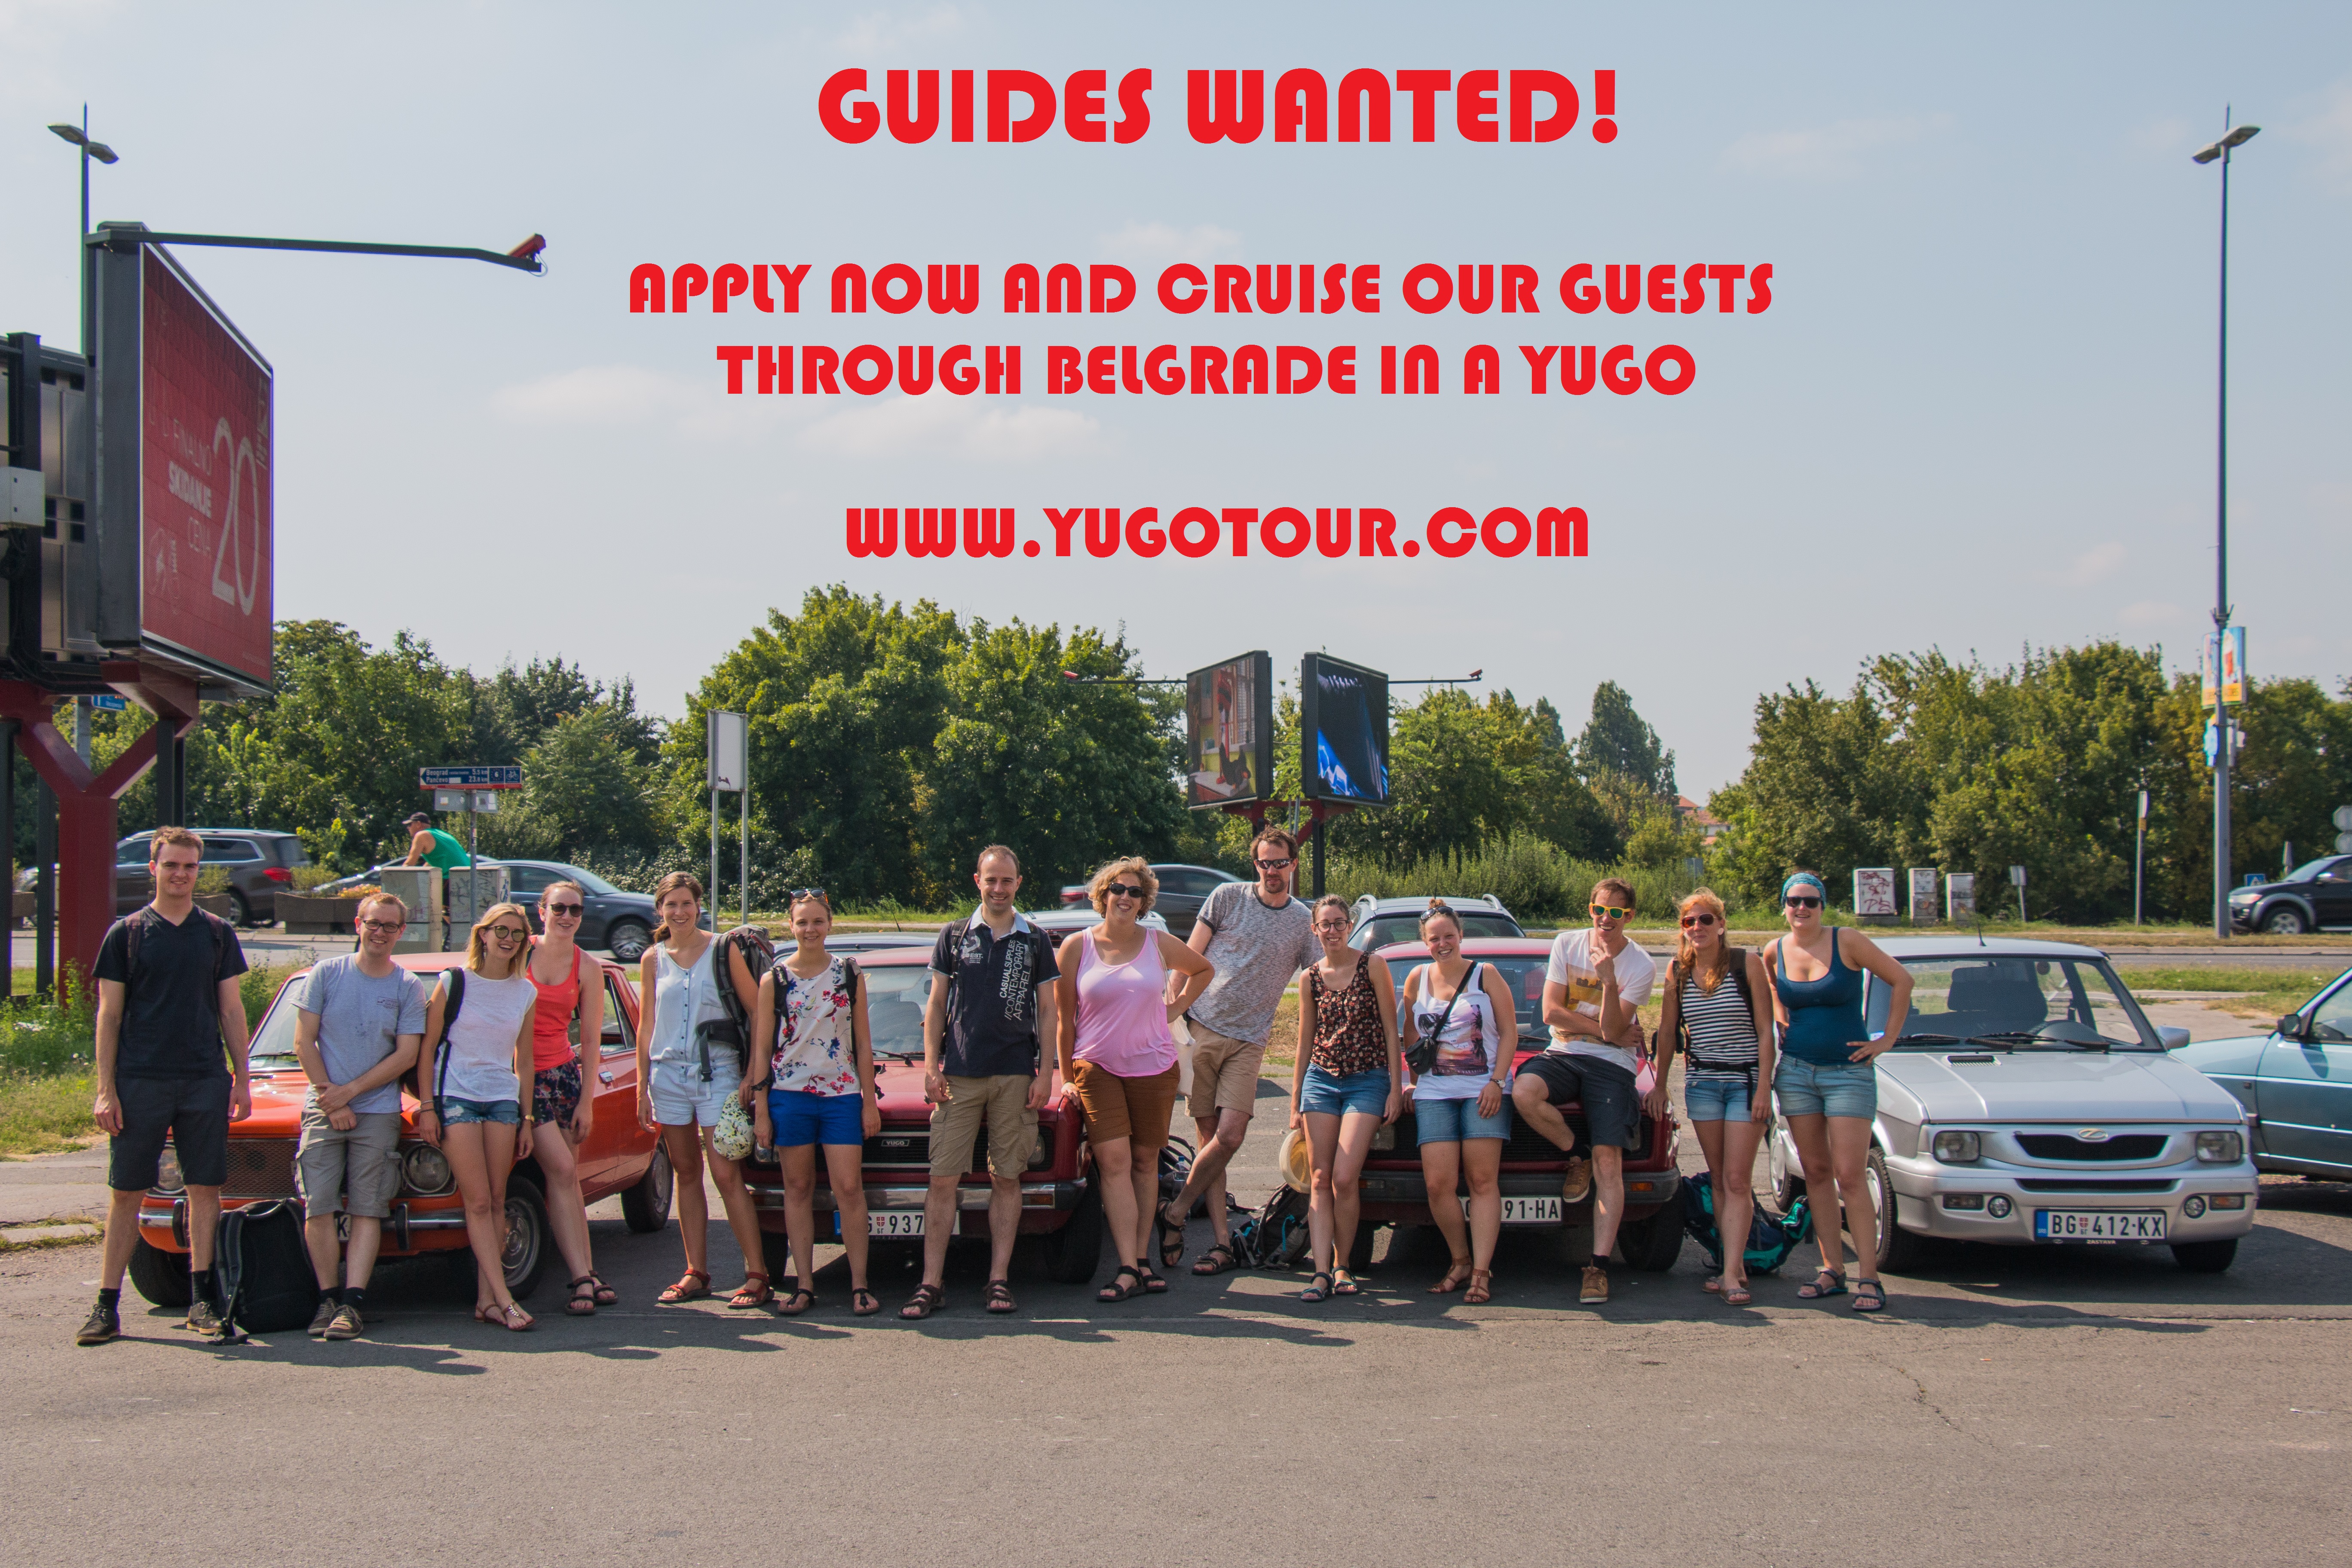 YugoTour Guides Wanted